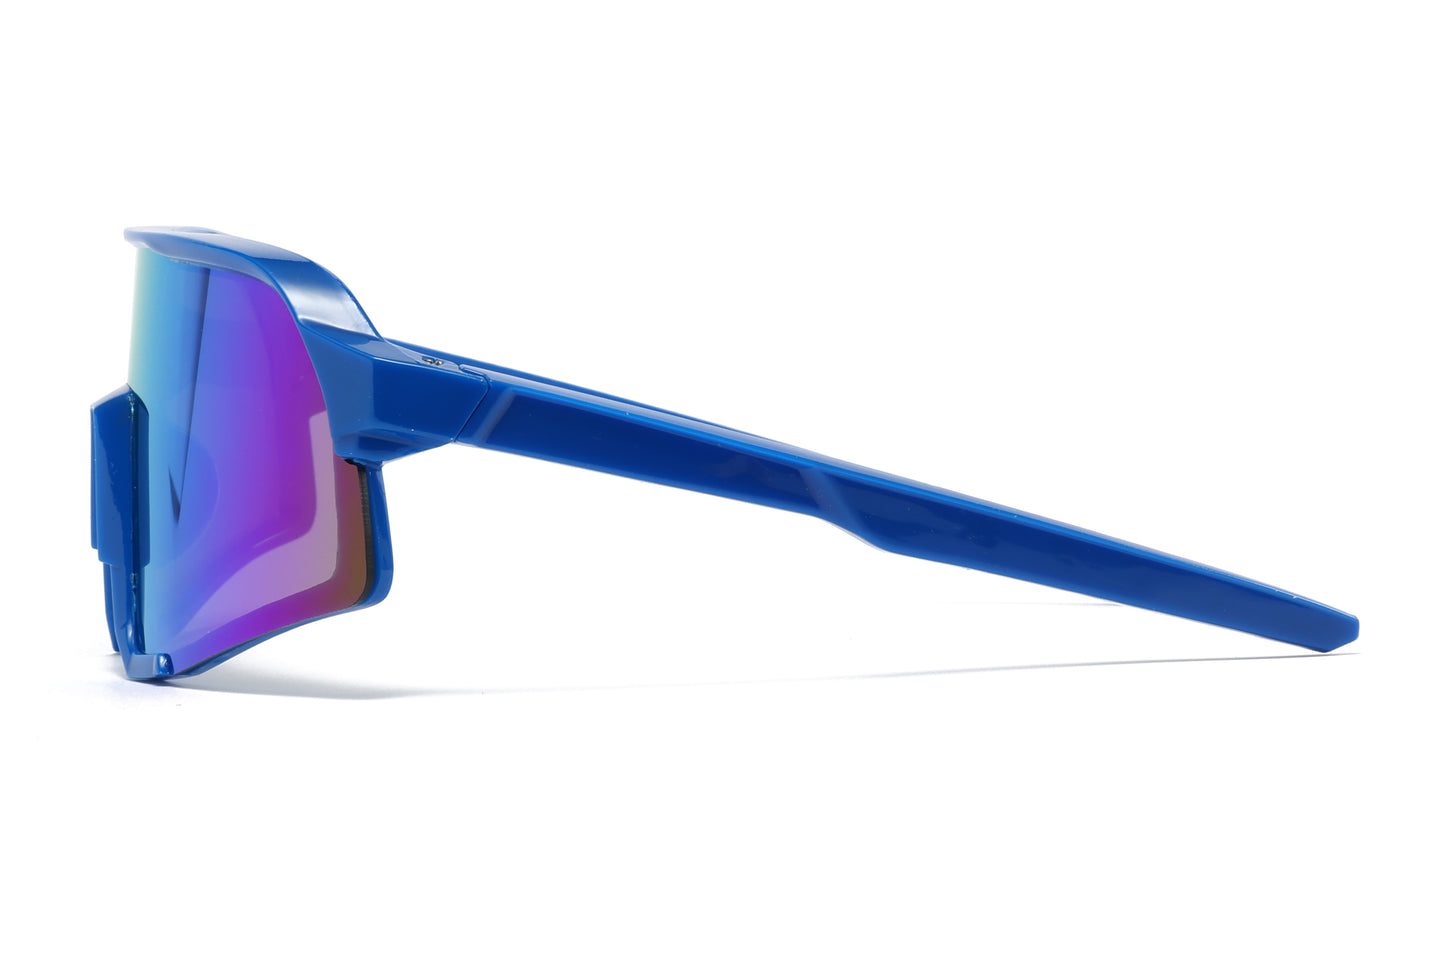 4582 - Kids Sport One shield Sunglasses with Color Mirrored Lens